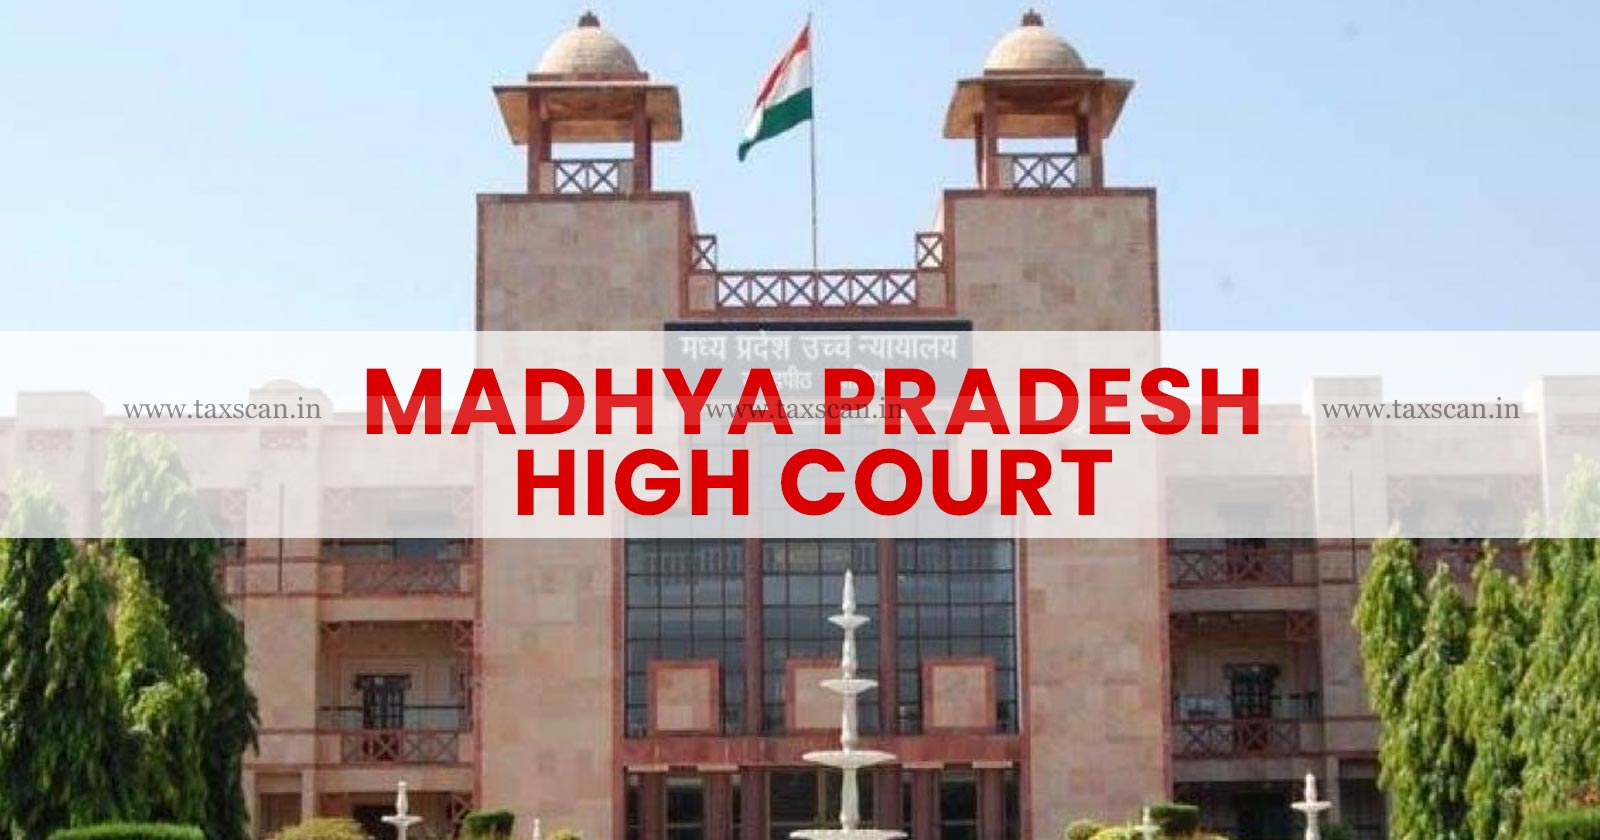 Petition - Arbitration and Conciliation Act - Arbitration - Conciliation Act - Agreement - Arbitrator - Madhya Pradesh High Court - Taxscan